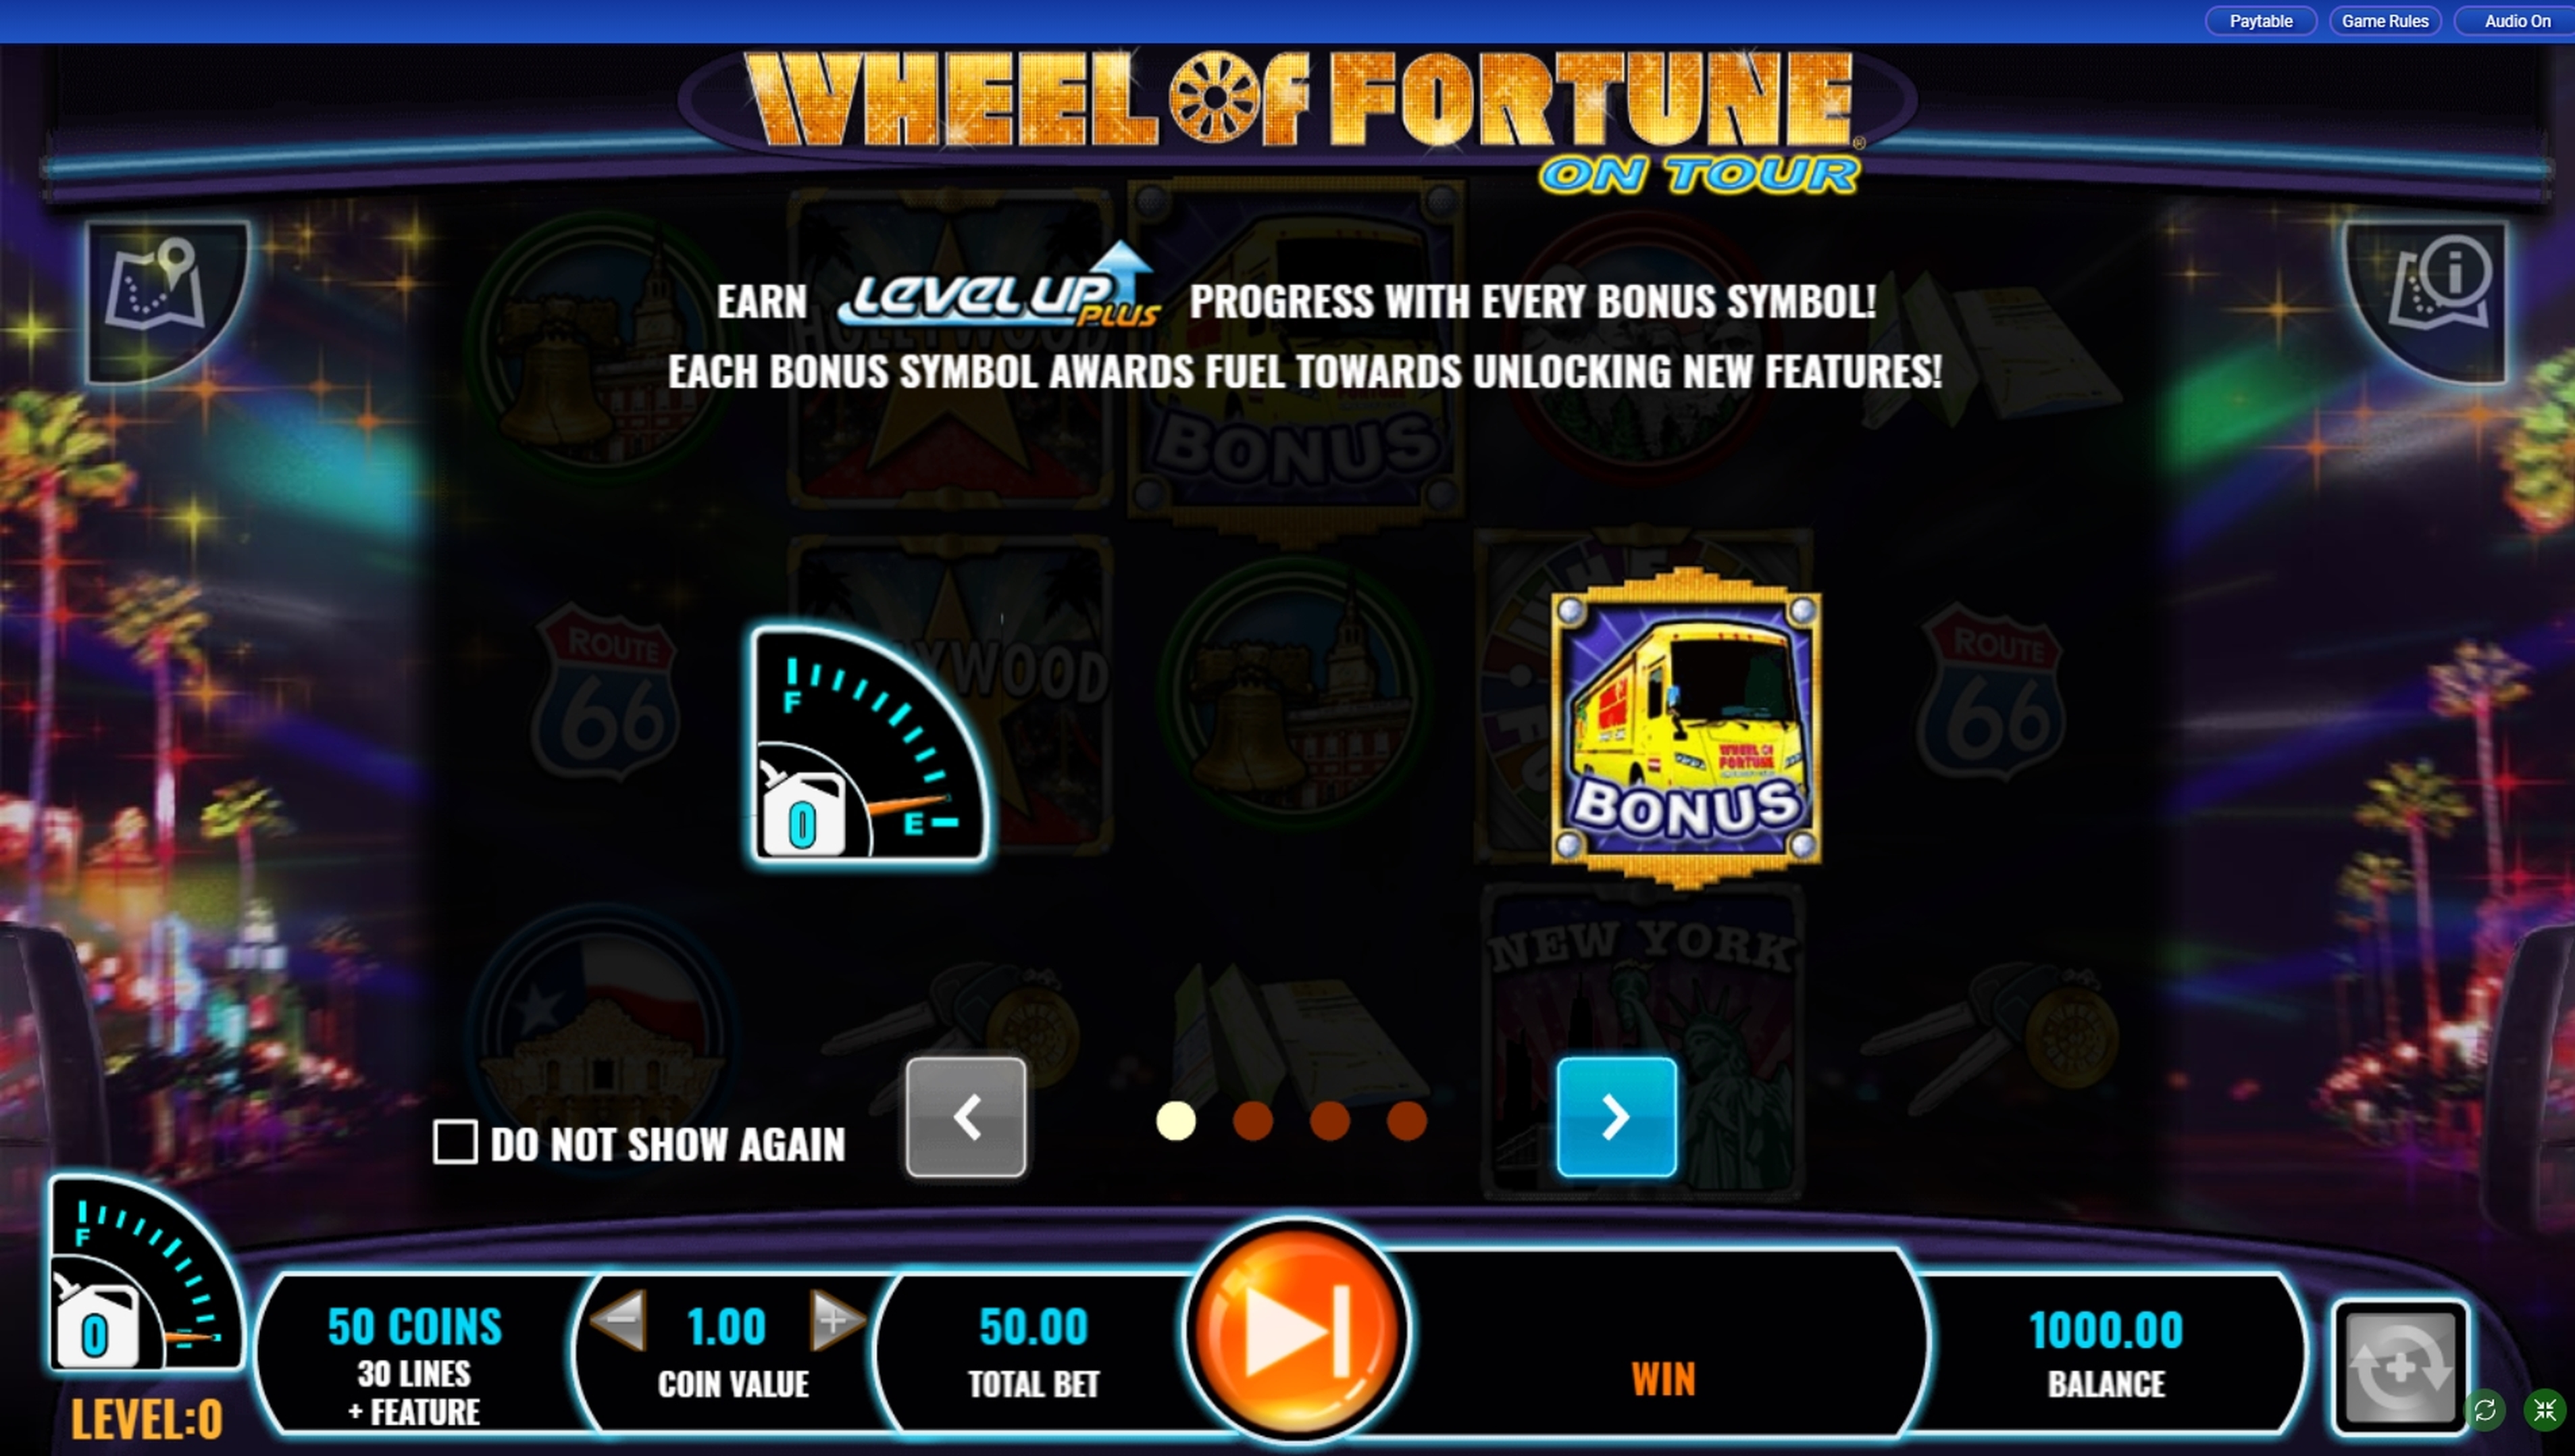 Play Wheel of Fortune on tour Free Casino Slot Game by IGT